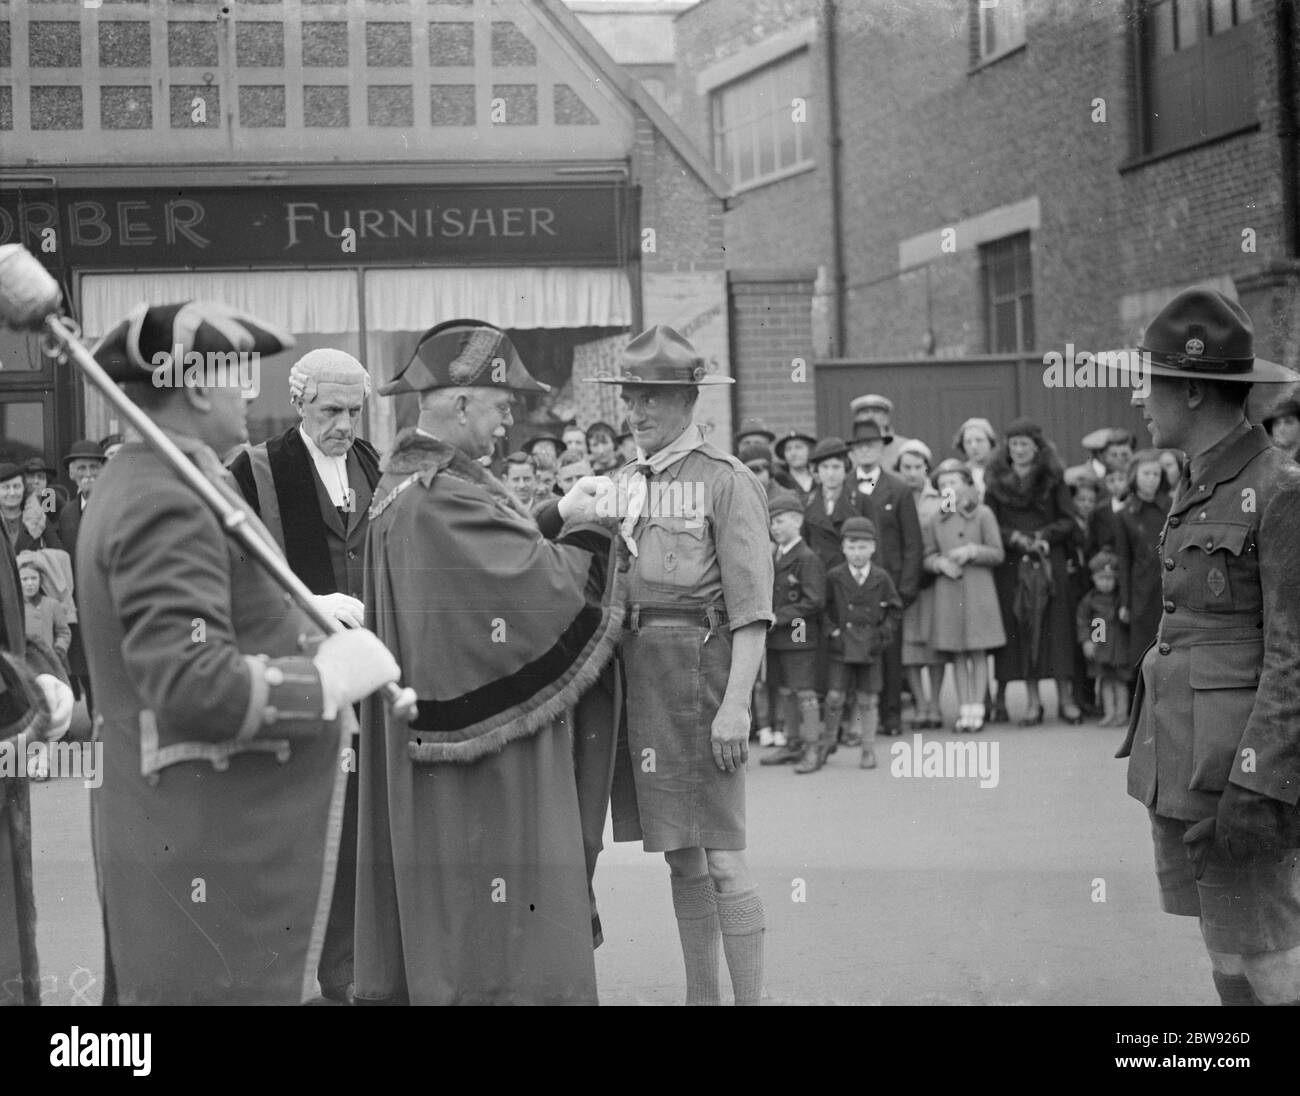 St George ' s day scout parade at Dartford in Kent . The Mayor presents a medal . W A Ward ( Mayor of Dartford ) and Assistant Commander W G Philips . 1938 Stock Photo